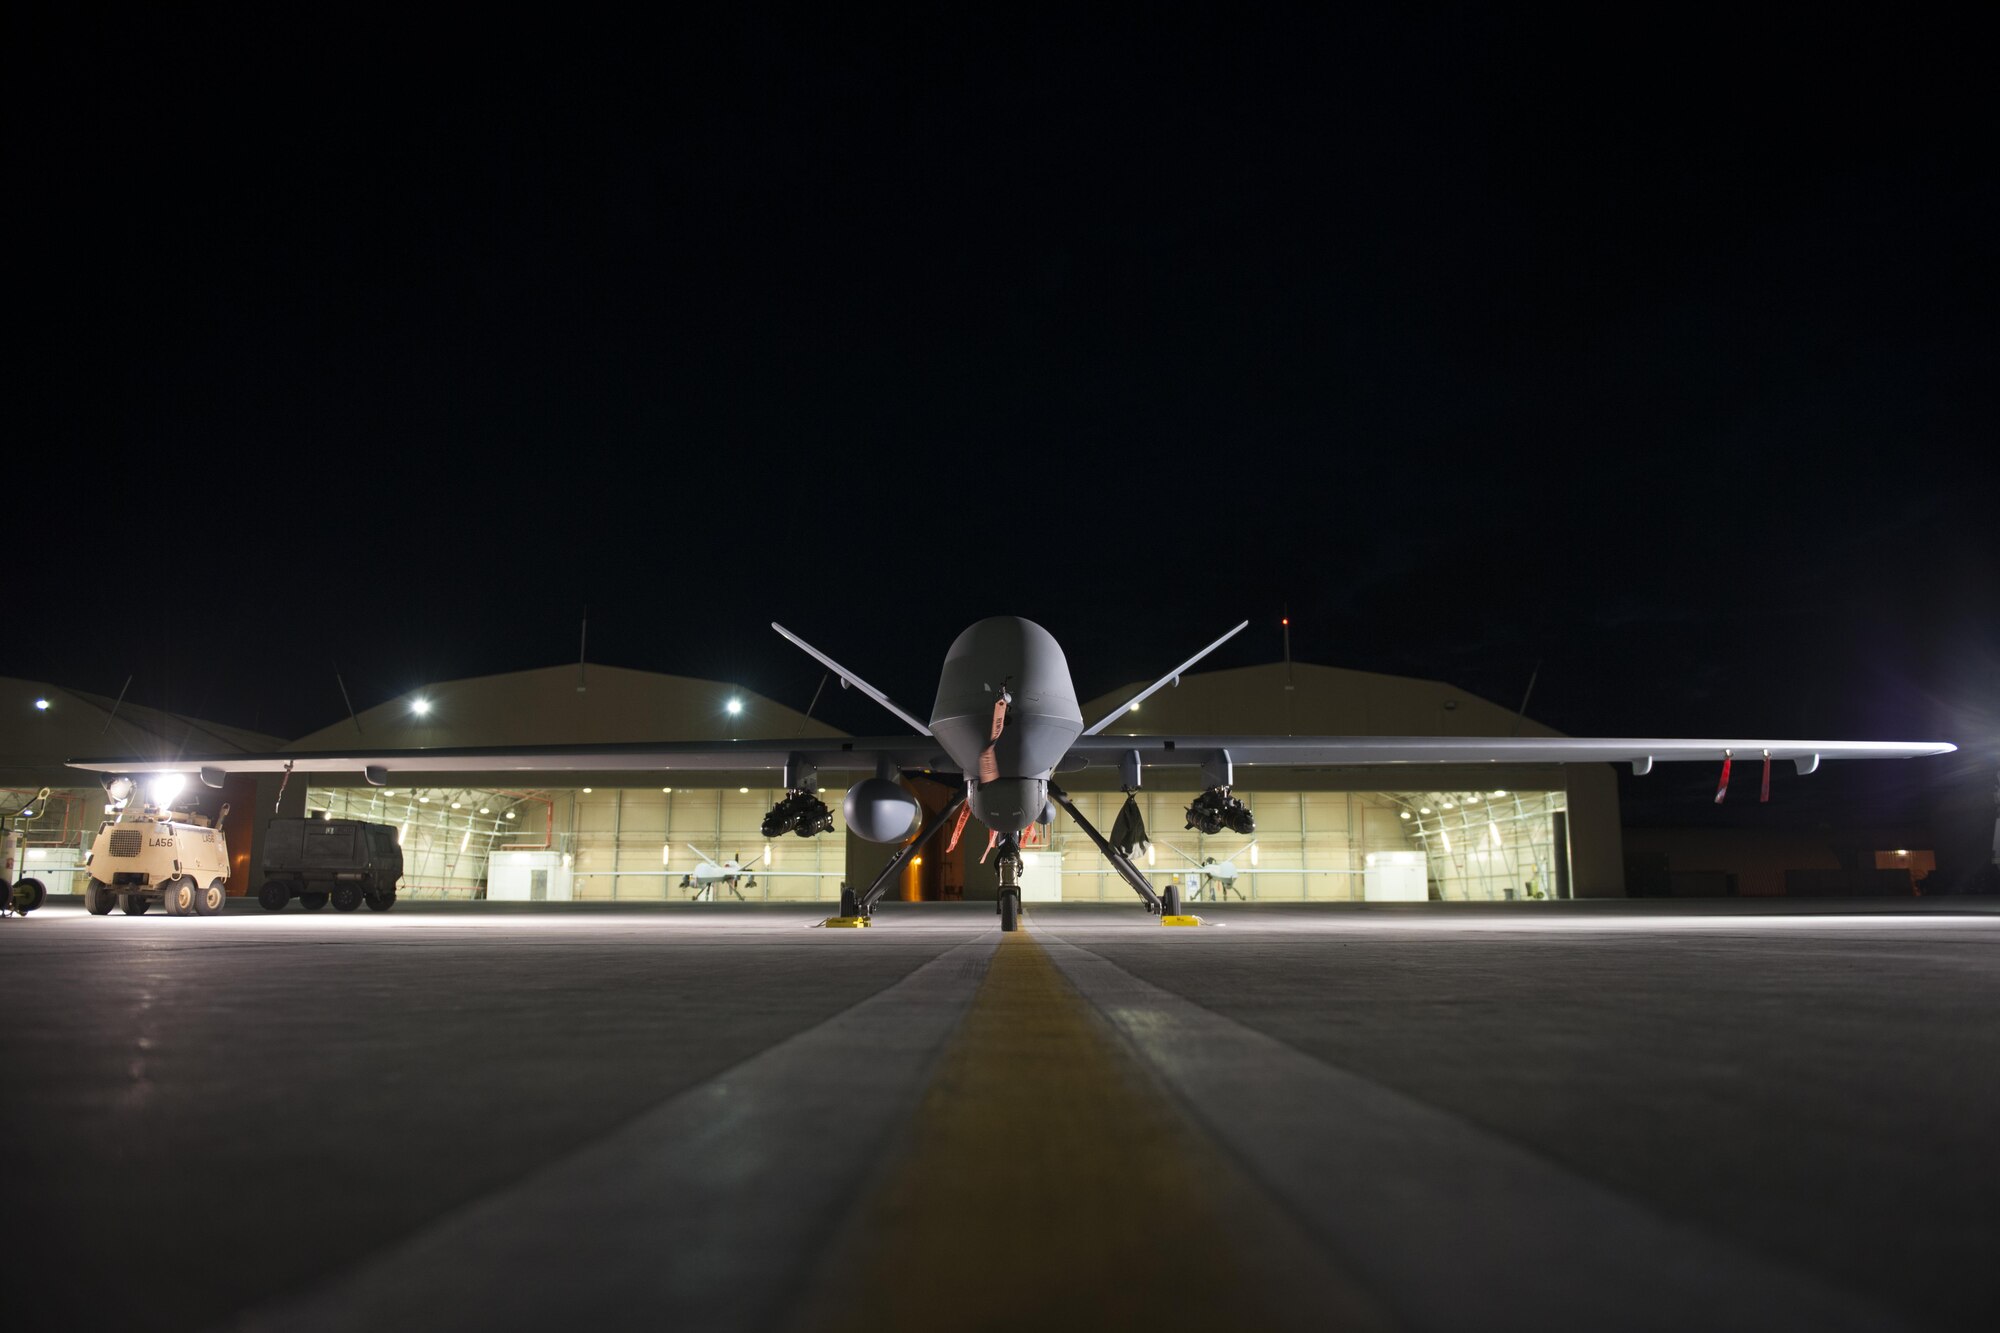 An MQ-9 Reaper equipped with an extended range modification from the 62nd Expeditionary Reconnaissance Squadron sits on the ramp at Kandahar Airfield, Afghanistan, Dec. 6, 2015. The ER modification allows for 20 to 40 percent additional flight time dependent on the aircraft's loadout. (U.S. Air Force photo by Tech. Sgt. Robert Cloys/Released)